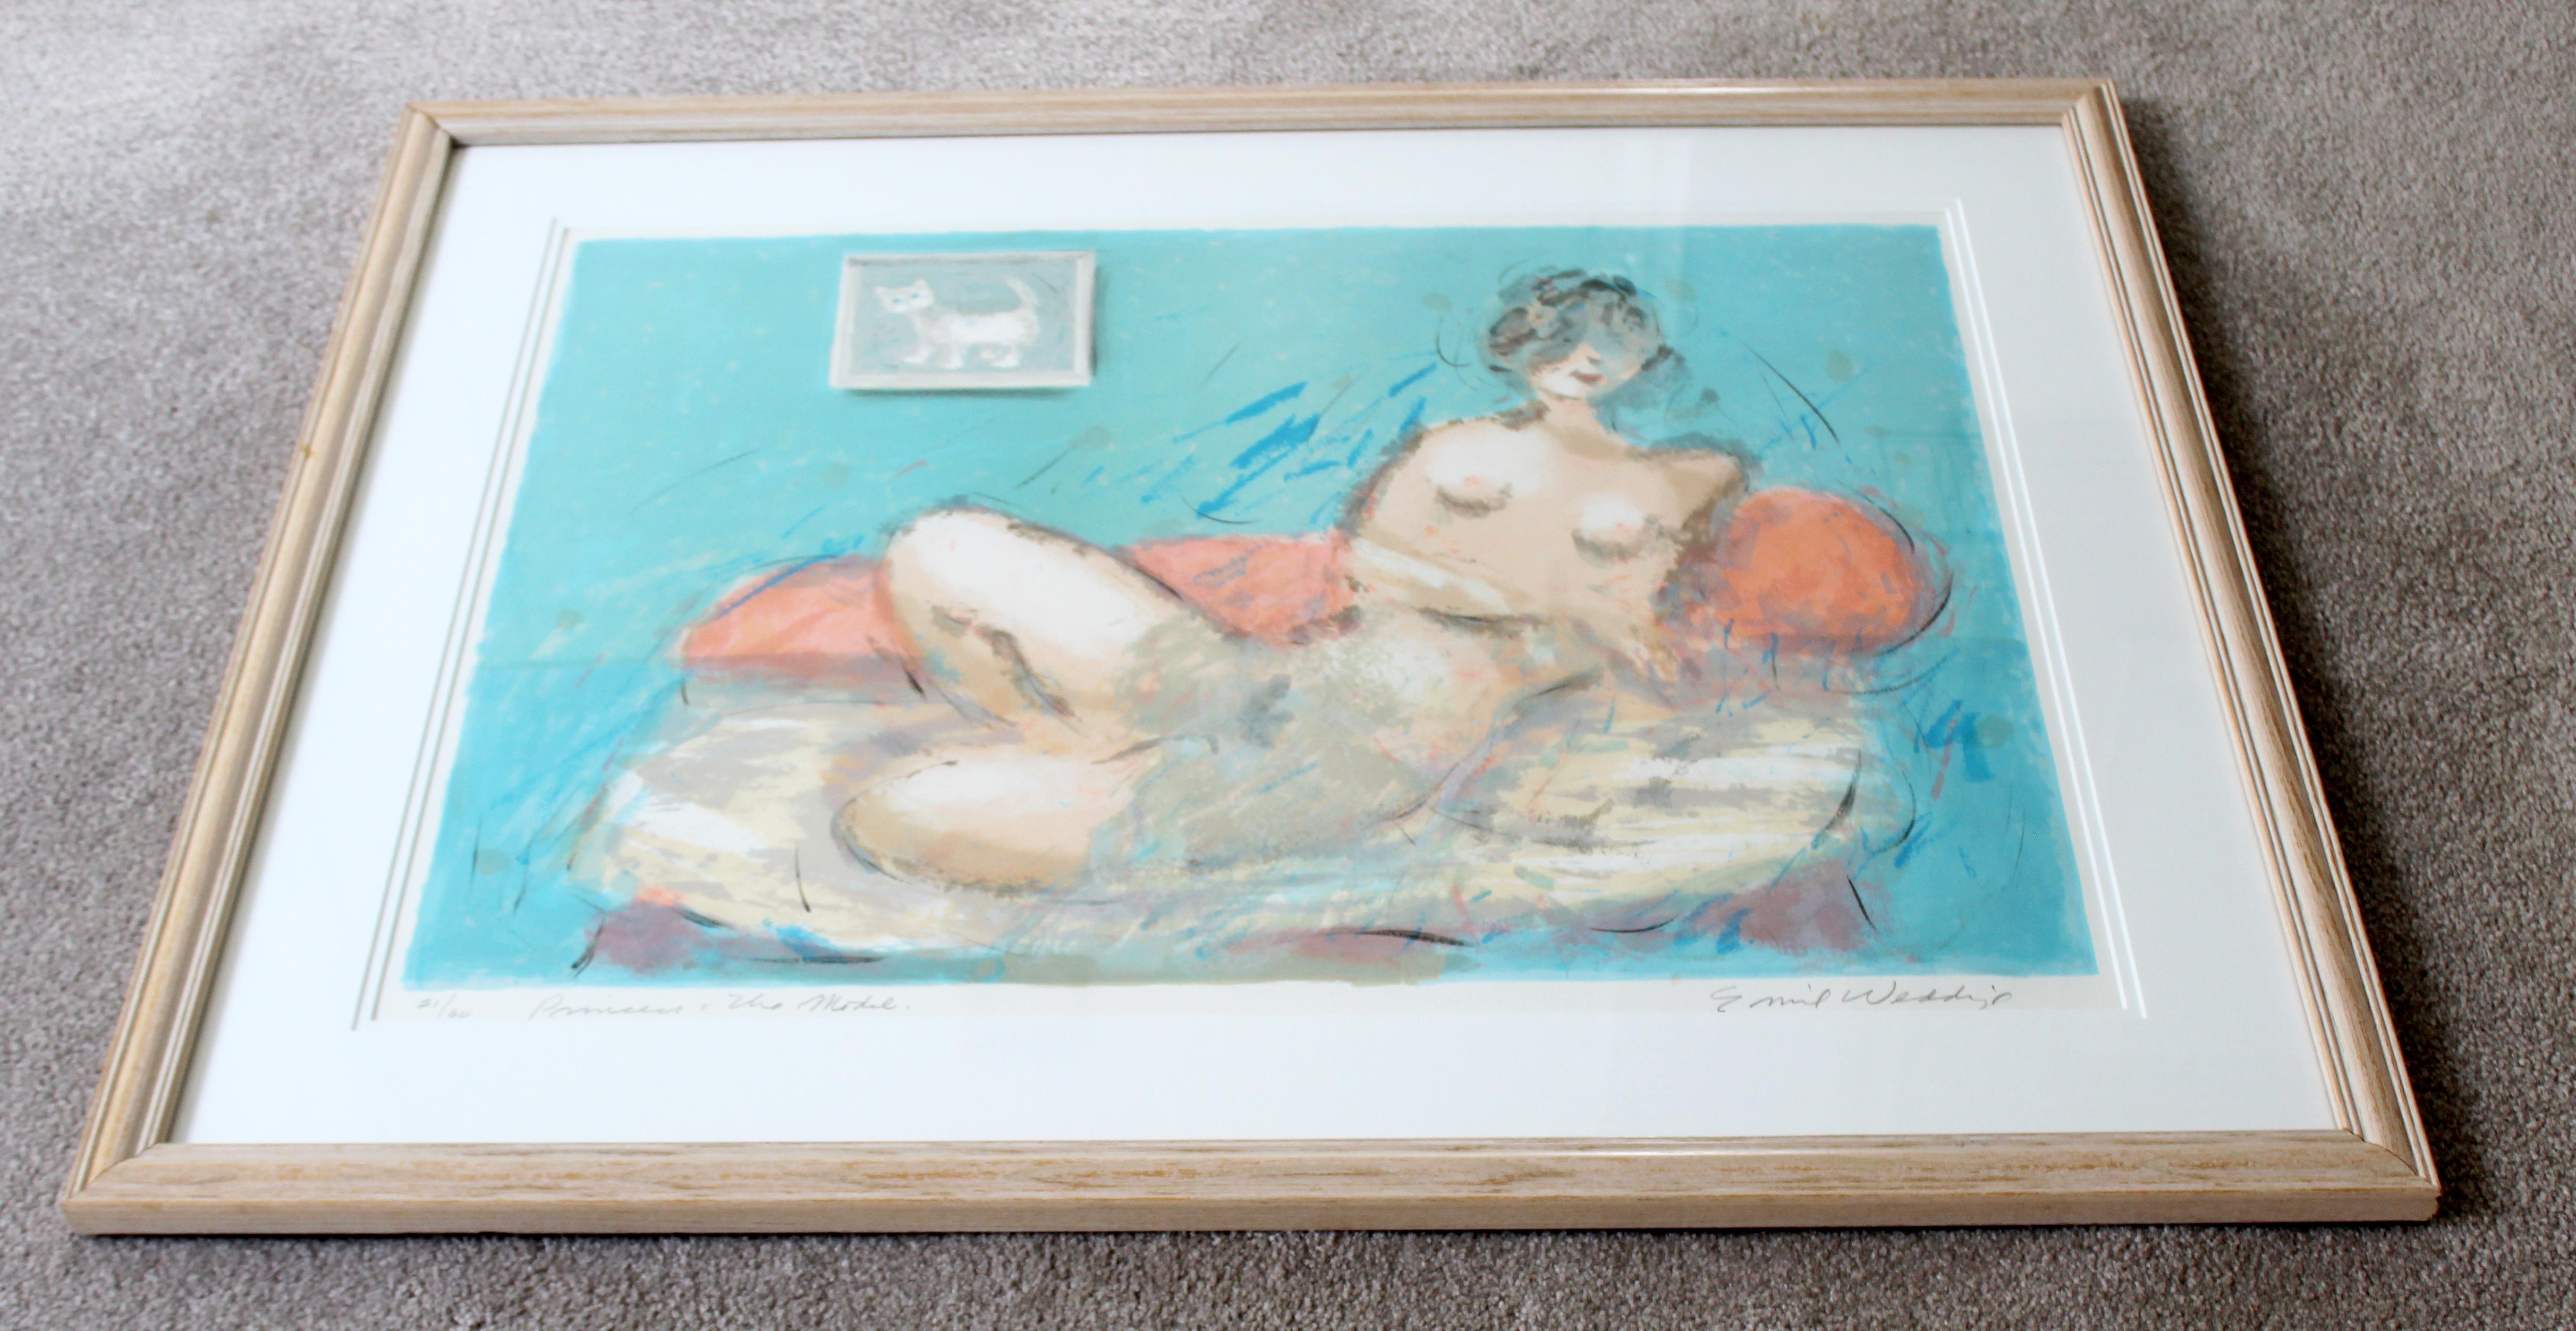 American Mid-Century Modern Framed Emil Weddige Signed Lithograph of Reclining Nude 21/60